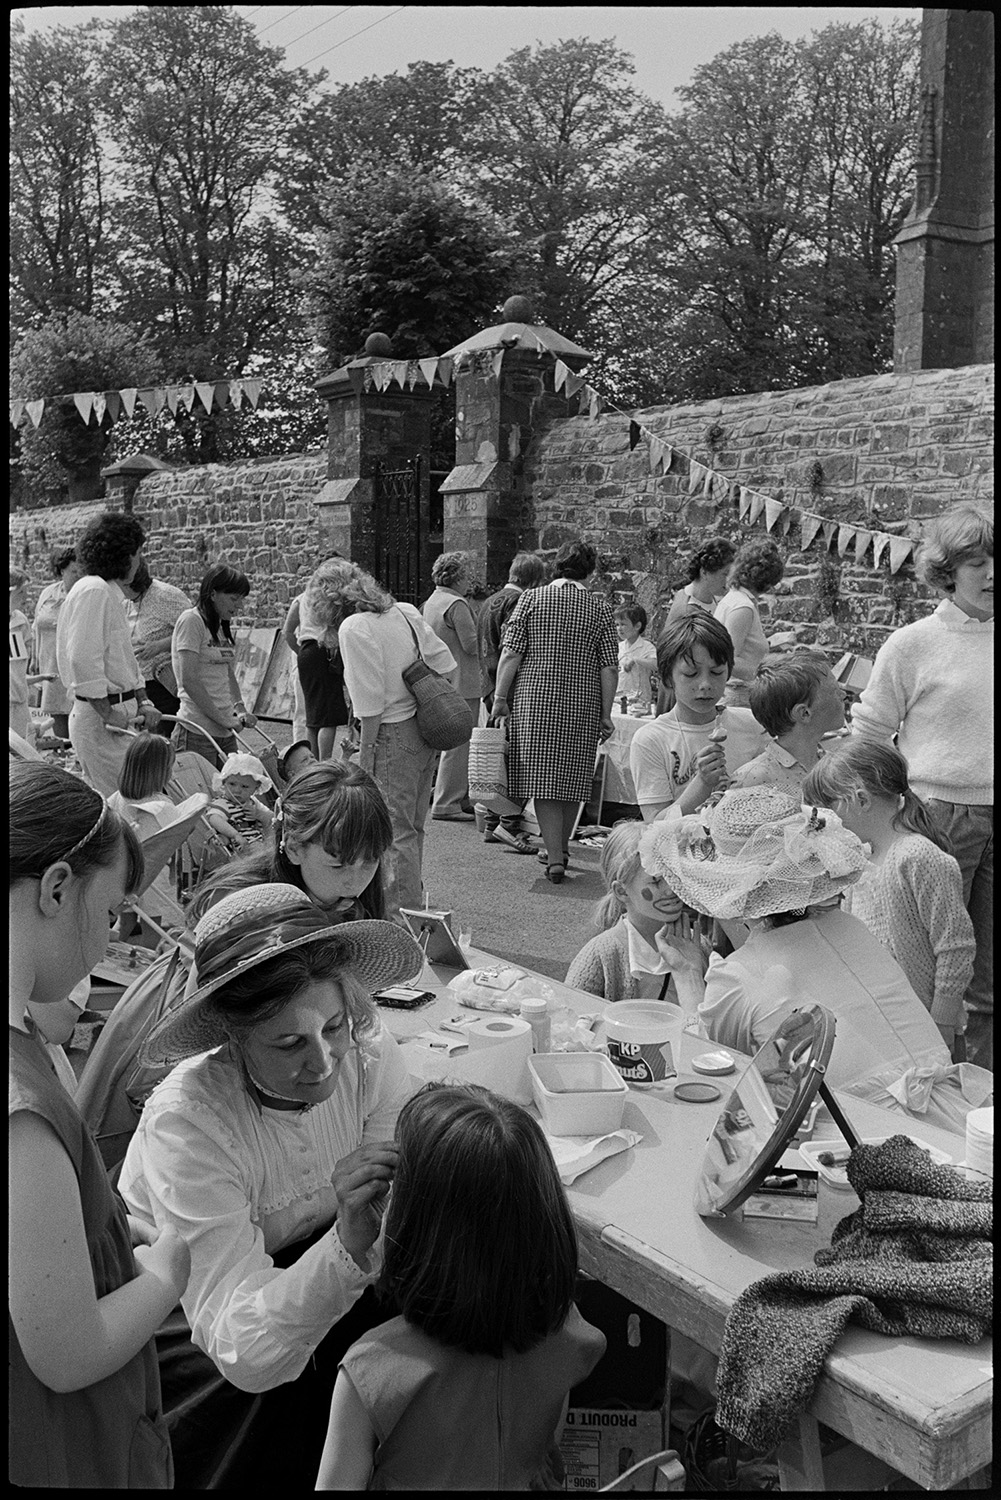 Chulmleigh Primary school fete with stalls, hand bells, eggs, games.
[People at Chulmleigh Primary School Fete looking at stalls.  Women wearing hats are painting children's faces on a stall in the foreground.]